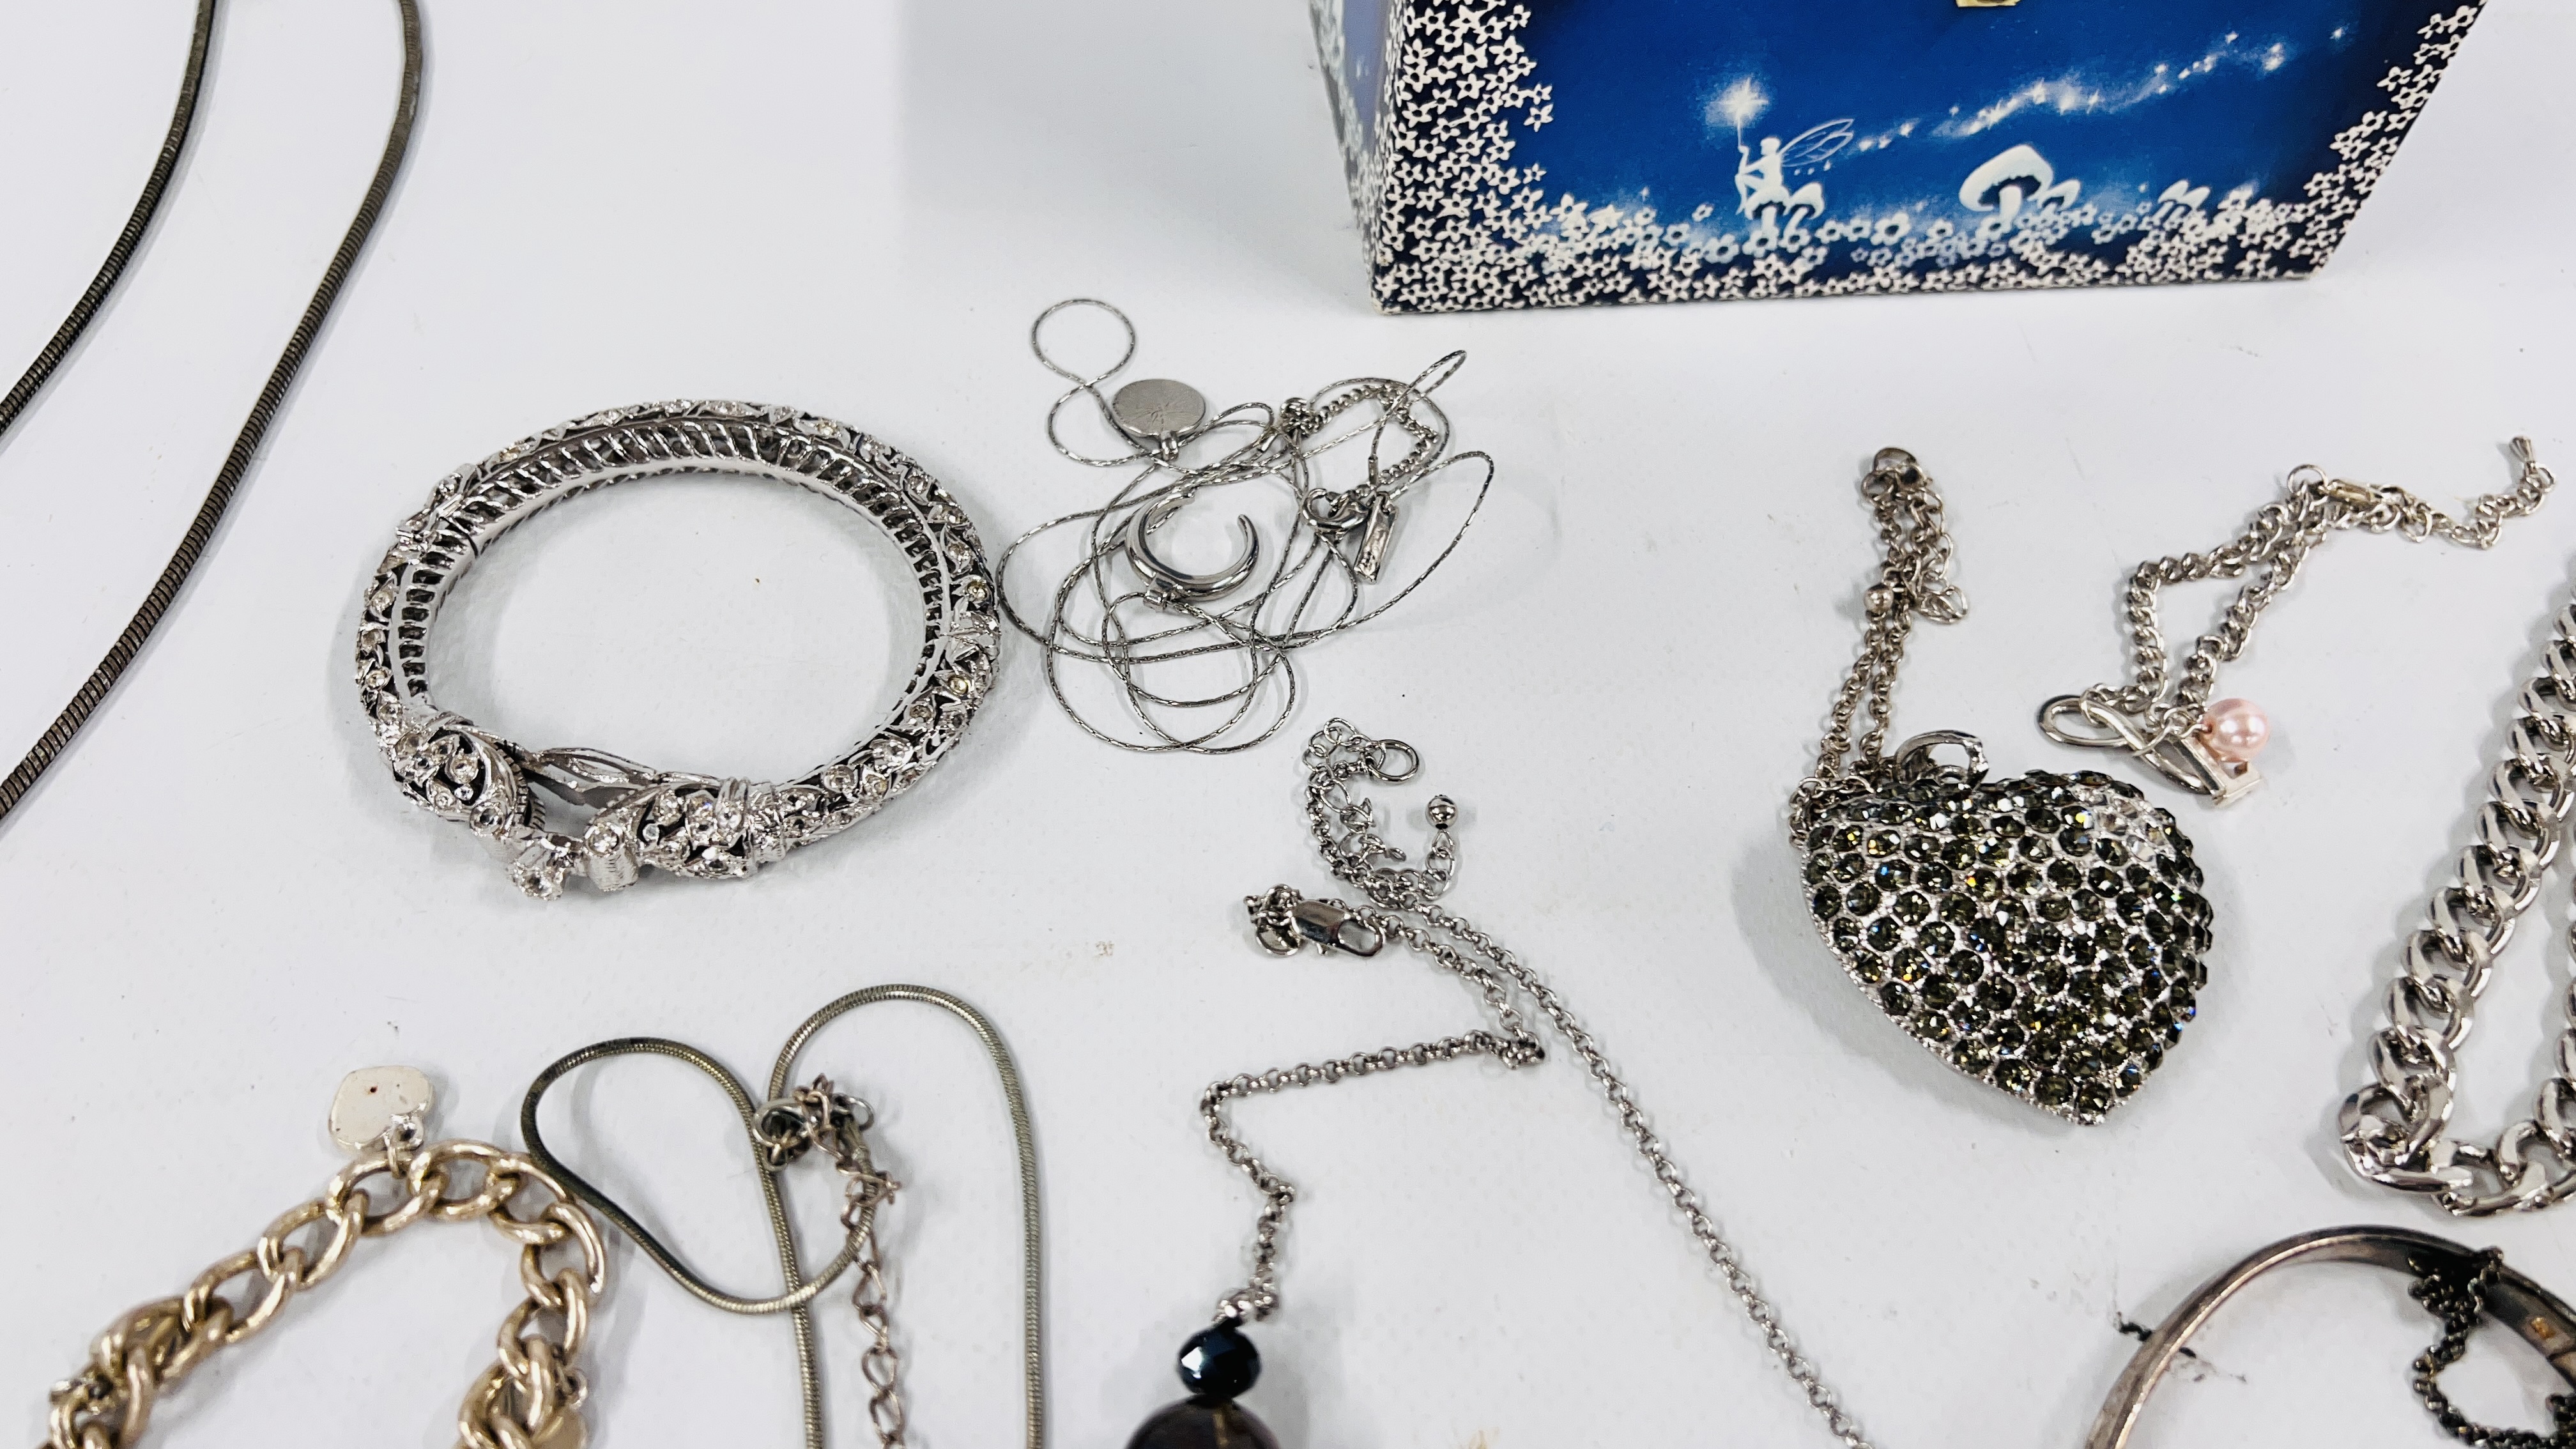 SELECTION OF SILVERTONE COSTUME JEWELLERY ALONG WITH A JEWELLERY BOX FULL OF BEADED NECKLACES. - Image 11 of 12